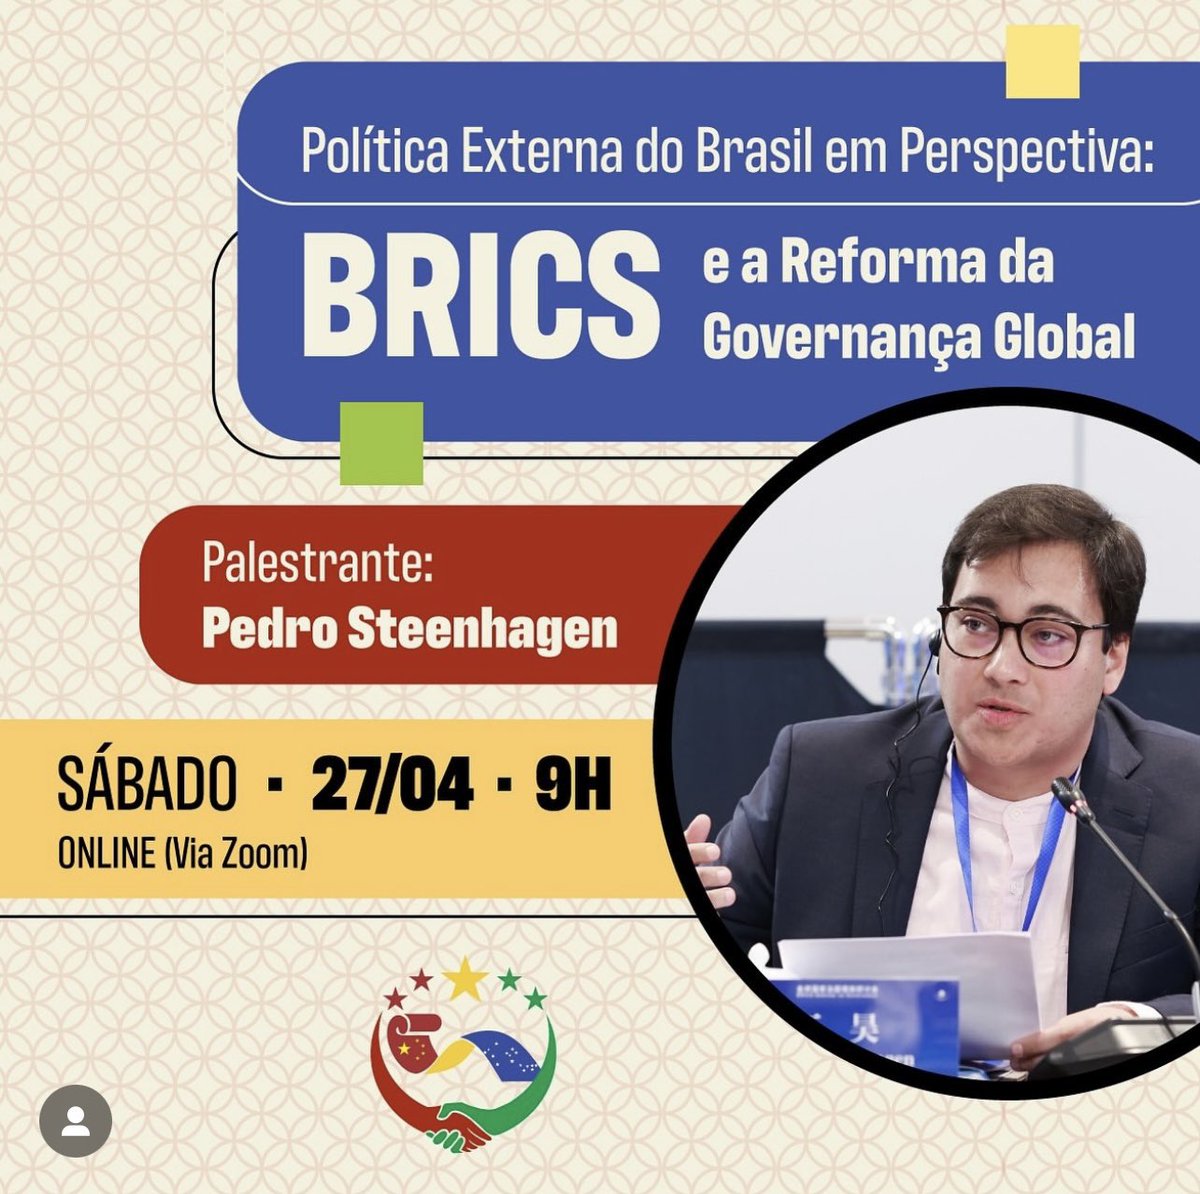 This Saturday (April 27th) at 9:00 Brasília Time / 20:00 Beijing Time, I will give a lecture (in English) about “#Brazil’s #ForeignPolicy in Perspective: #BRICS and the Reform of #GlobalGovernance”. I thank Amanhã Brasil-China (ABC) and ASIC, @Tsinghua_Uni, for the invitation!